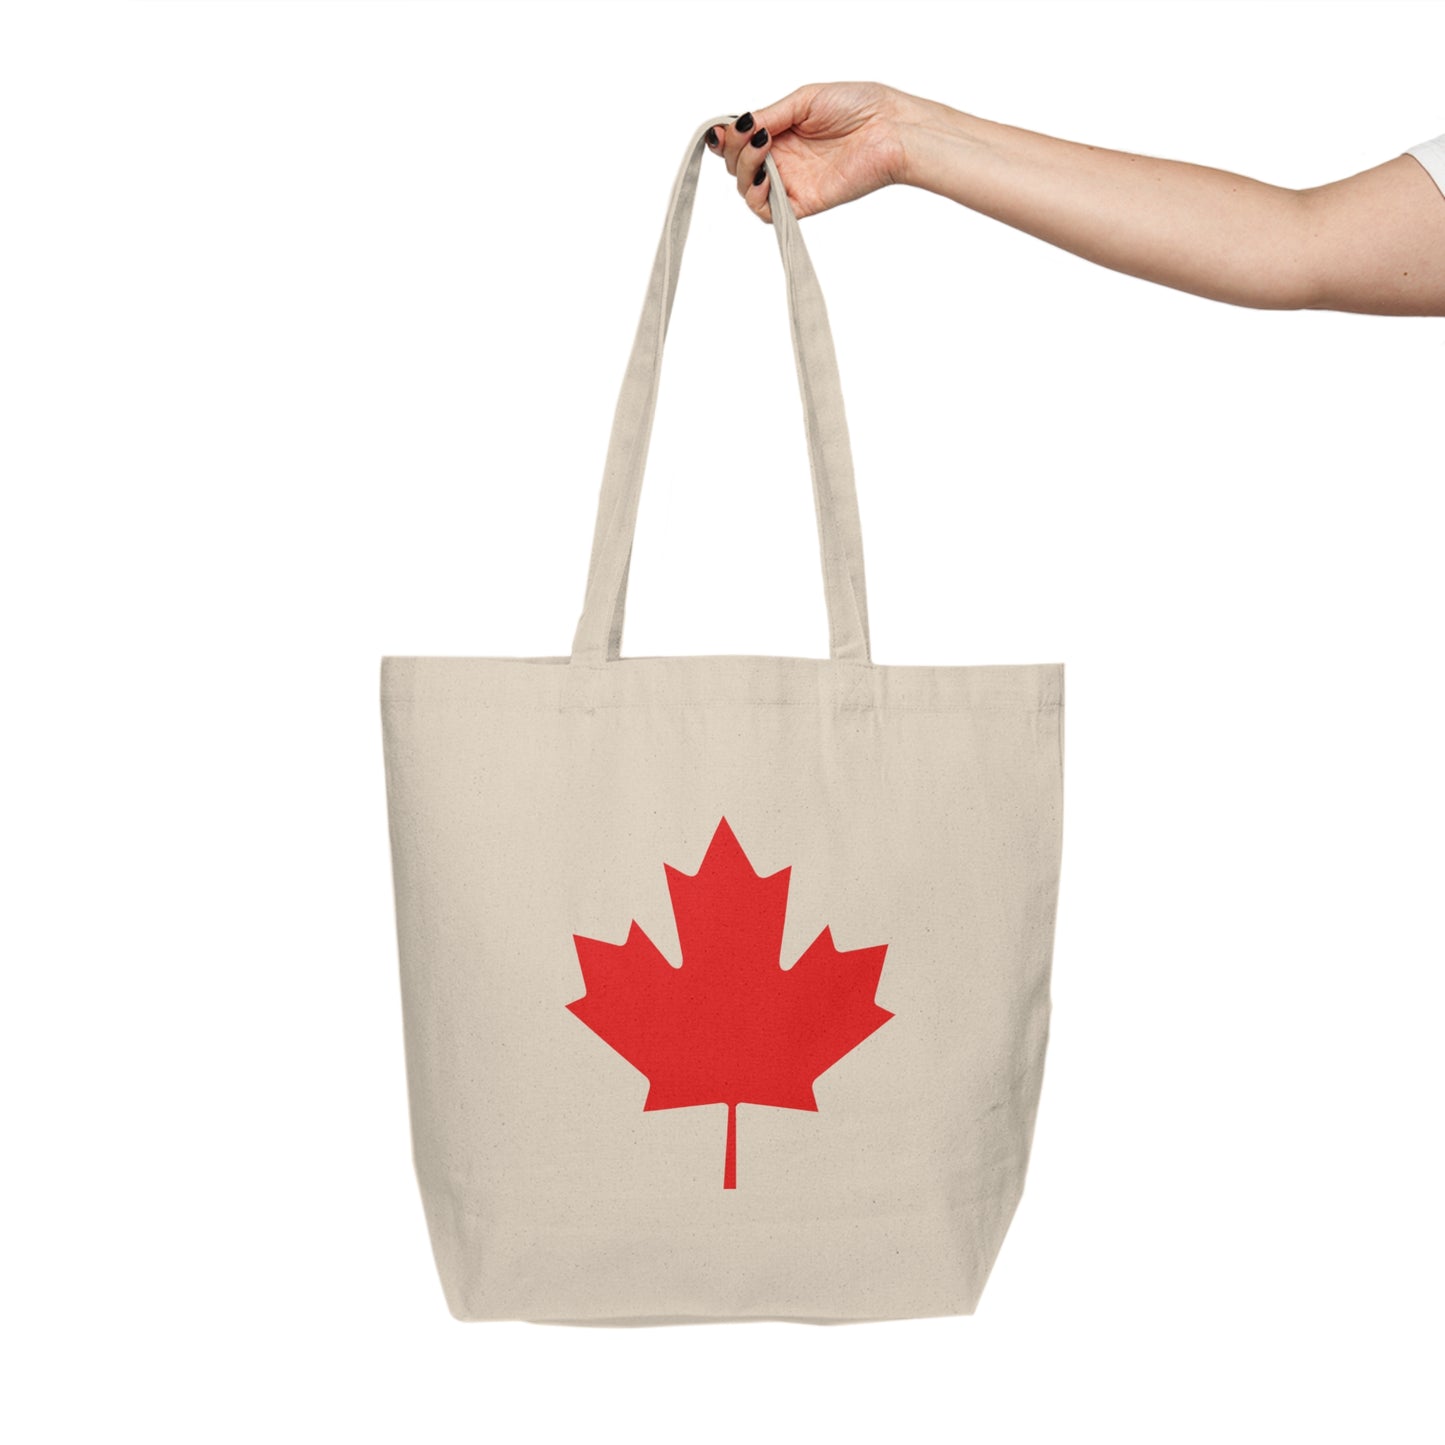 Canadian Maple Leaf Shopping Tote